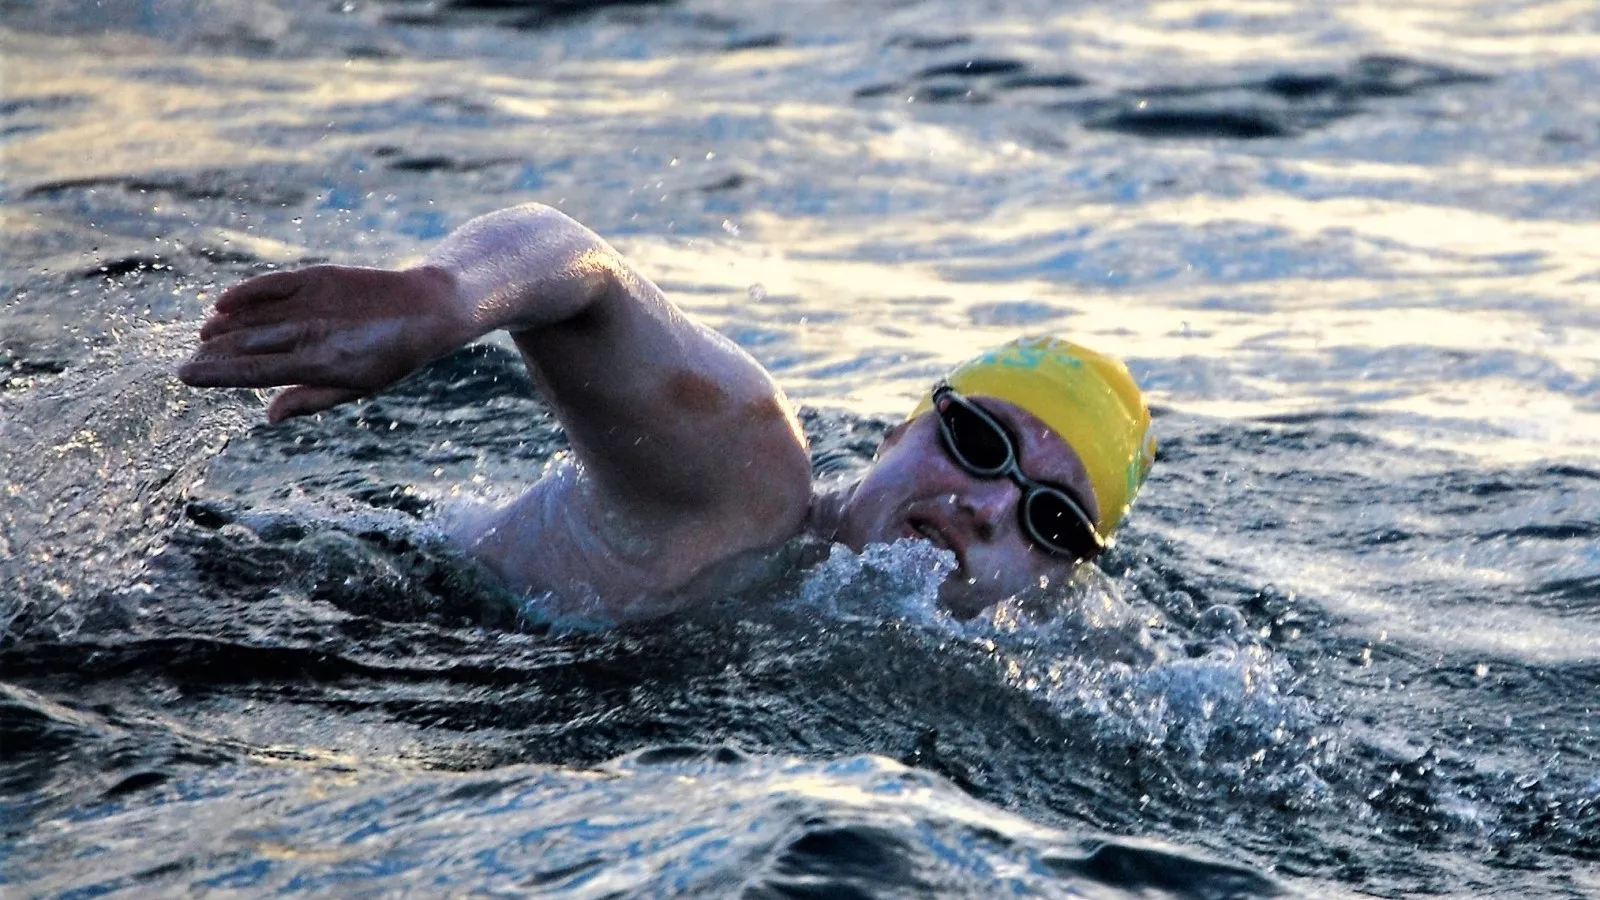 Lake Mead's water levels give swimmer rare chance to make history